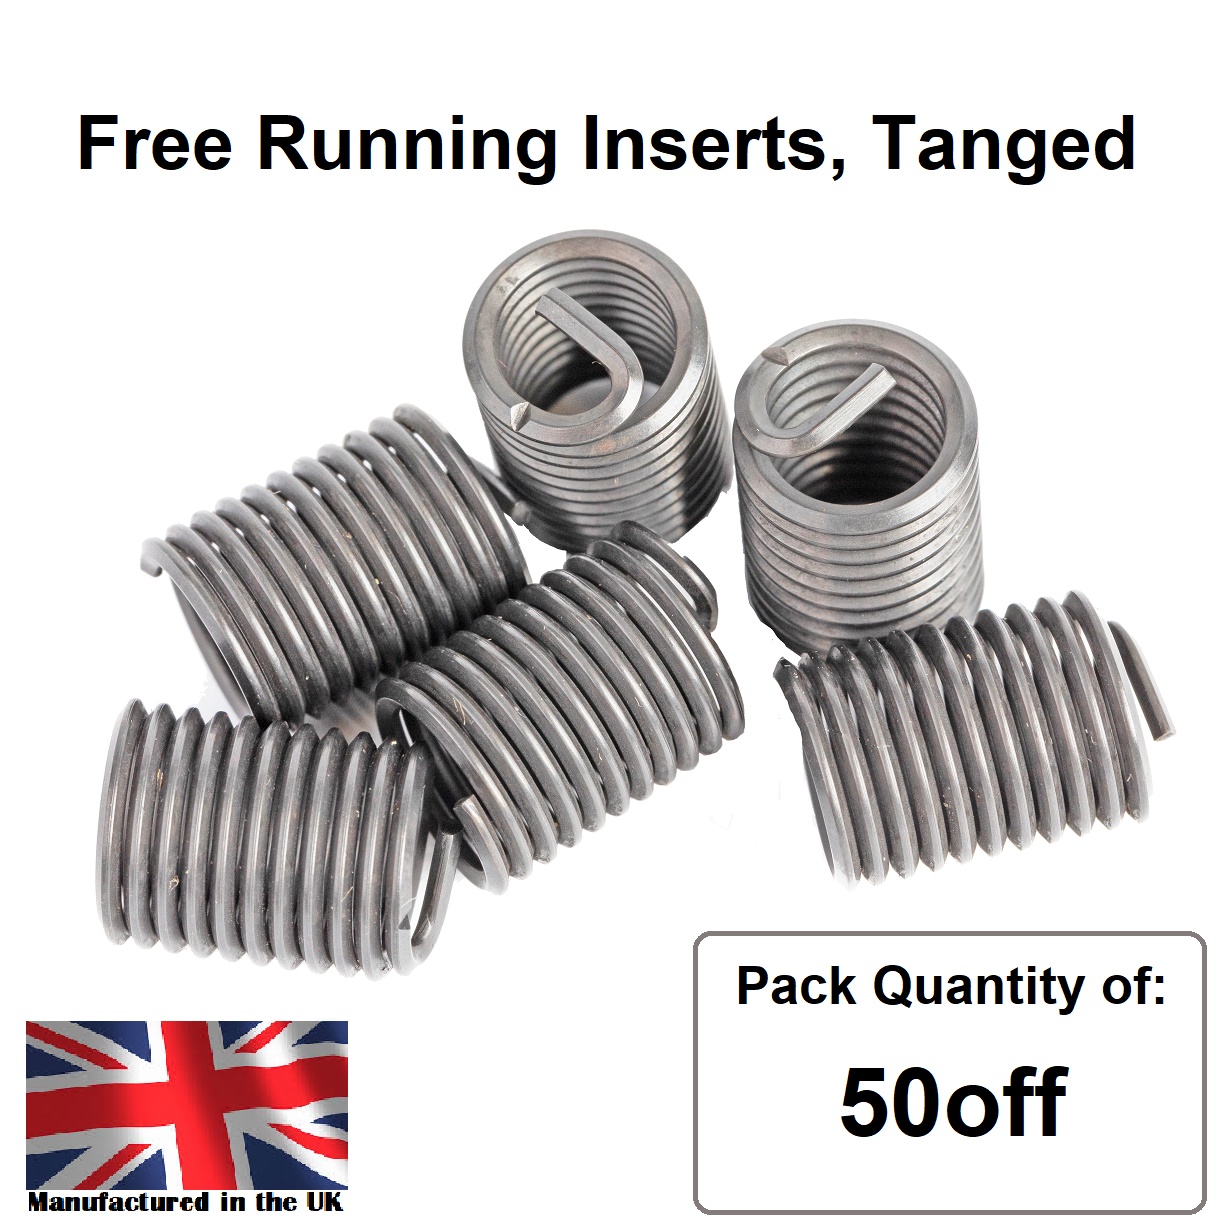 M3 x 0.5 x 3D Metric Coarse, Free Running, Tanged, Wire Thread Repair Insert, 304/A2 Stainless (Pack 50)